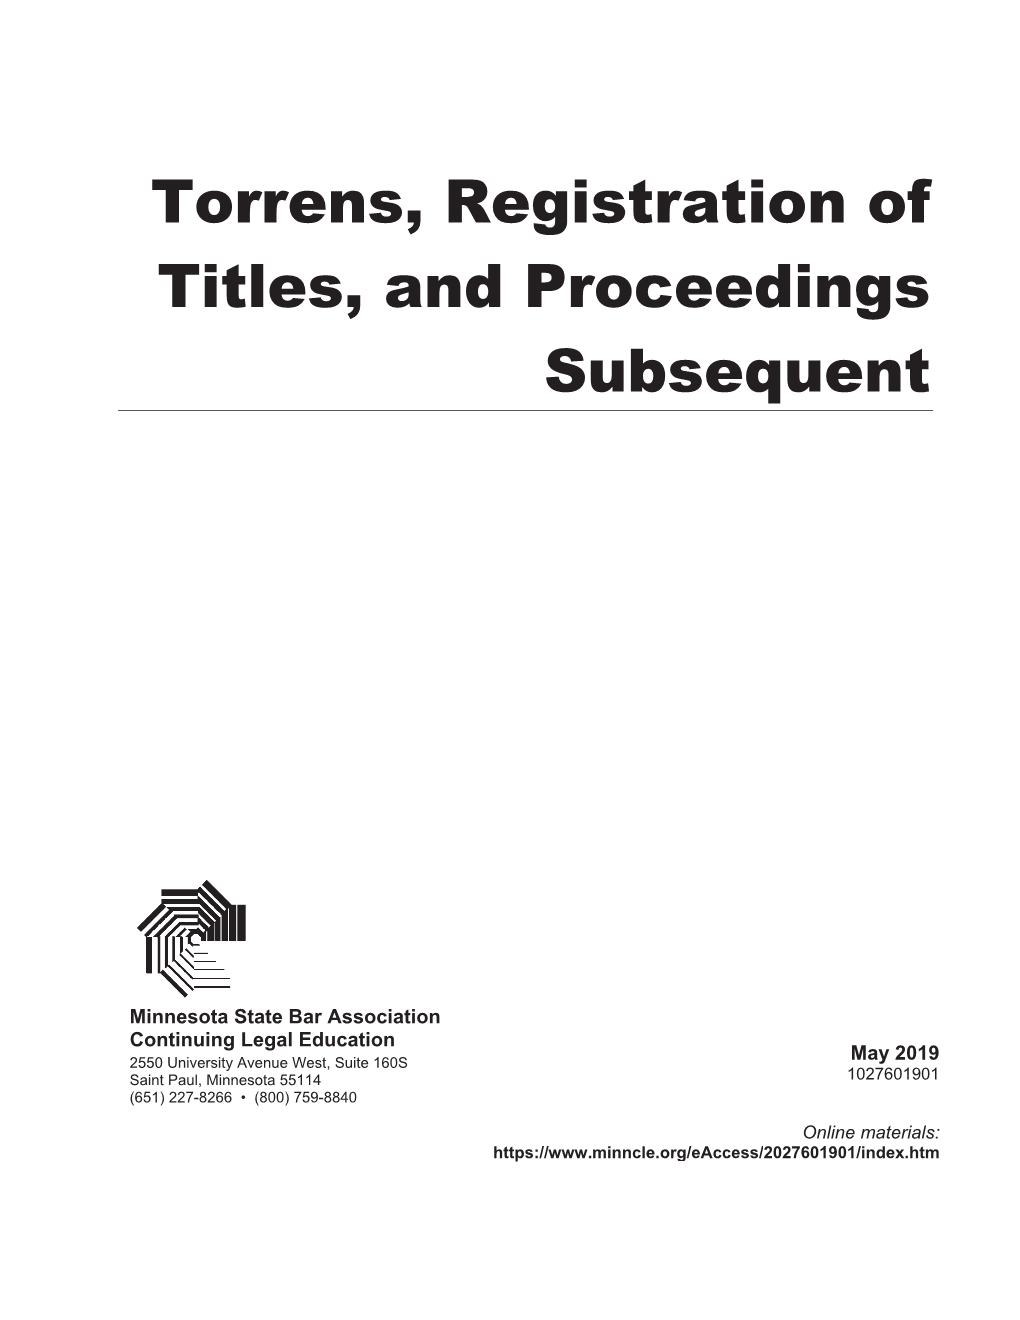 Torrens, Registration of Titles, and Proceedings Subsequent